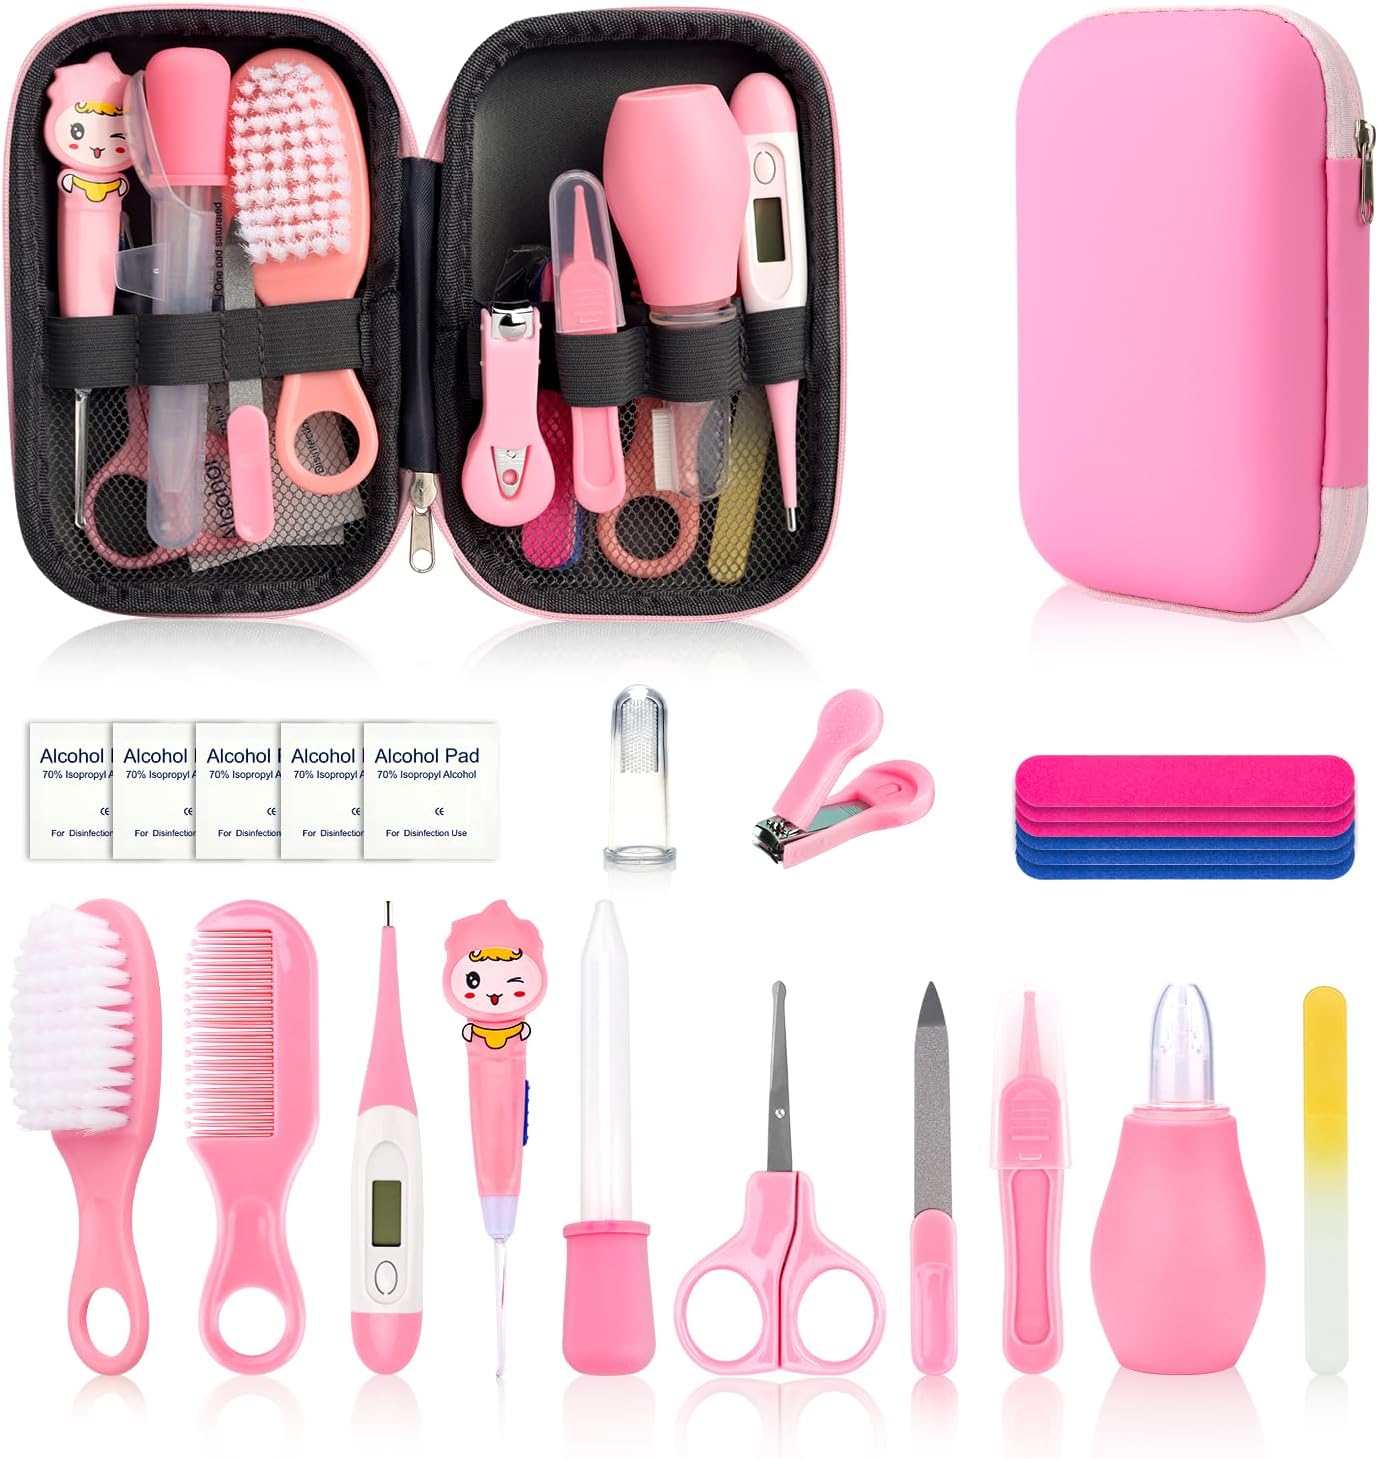 Baby Healthcare and Grooming Kit, Baby Safety Care Set, Baby Electric Nail Trimmer Set Newborn Nursery Health Care Set for Newborn Infant Toddlers Baby Boys Girls Kids (Pink-19 Kits)